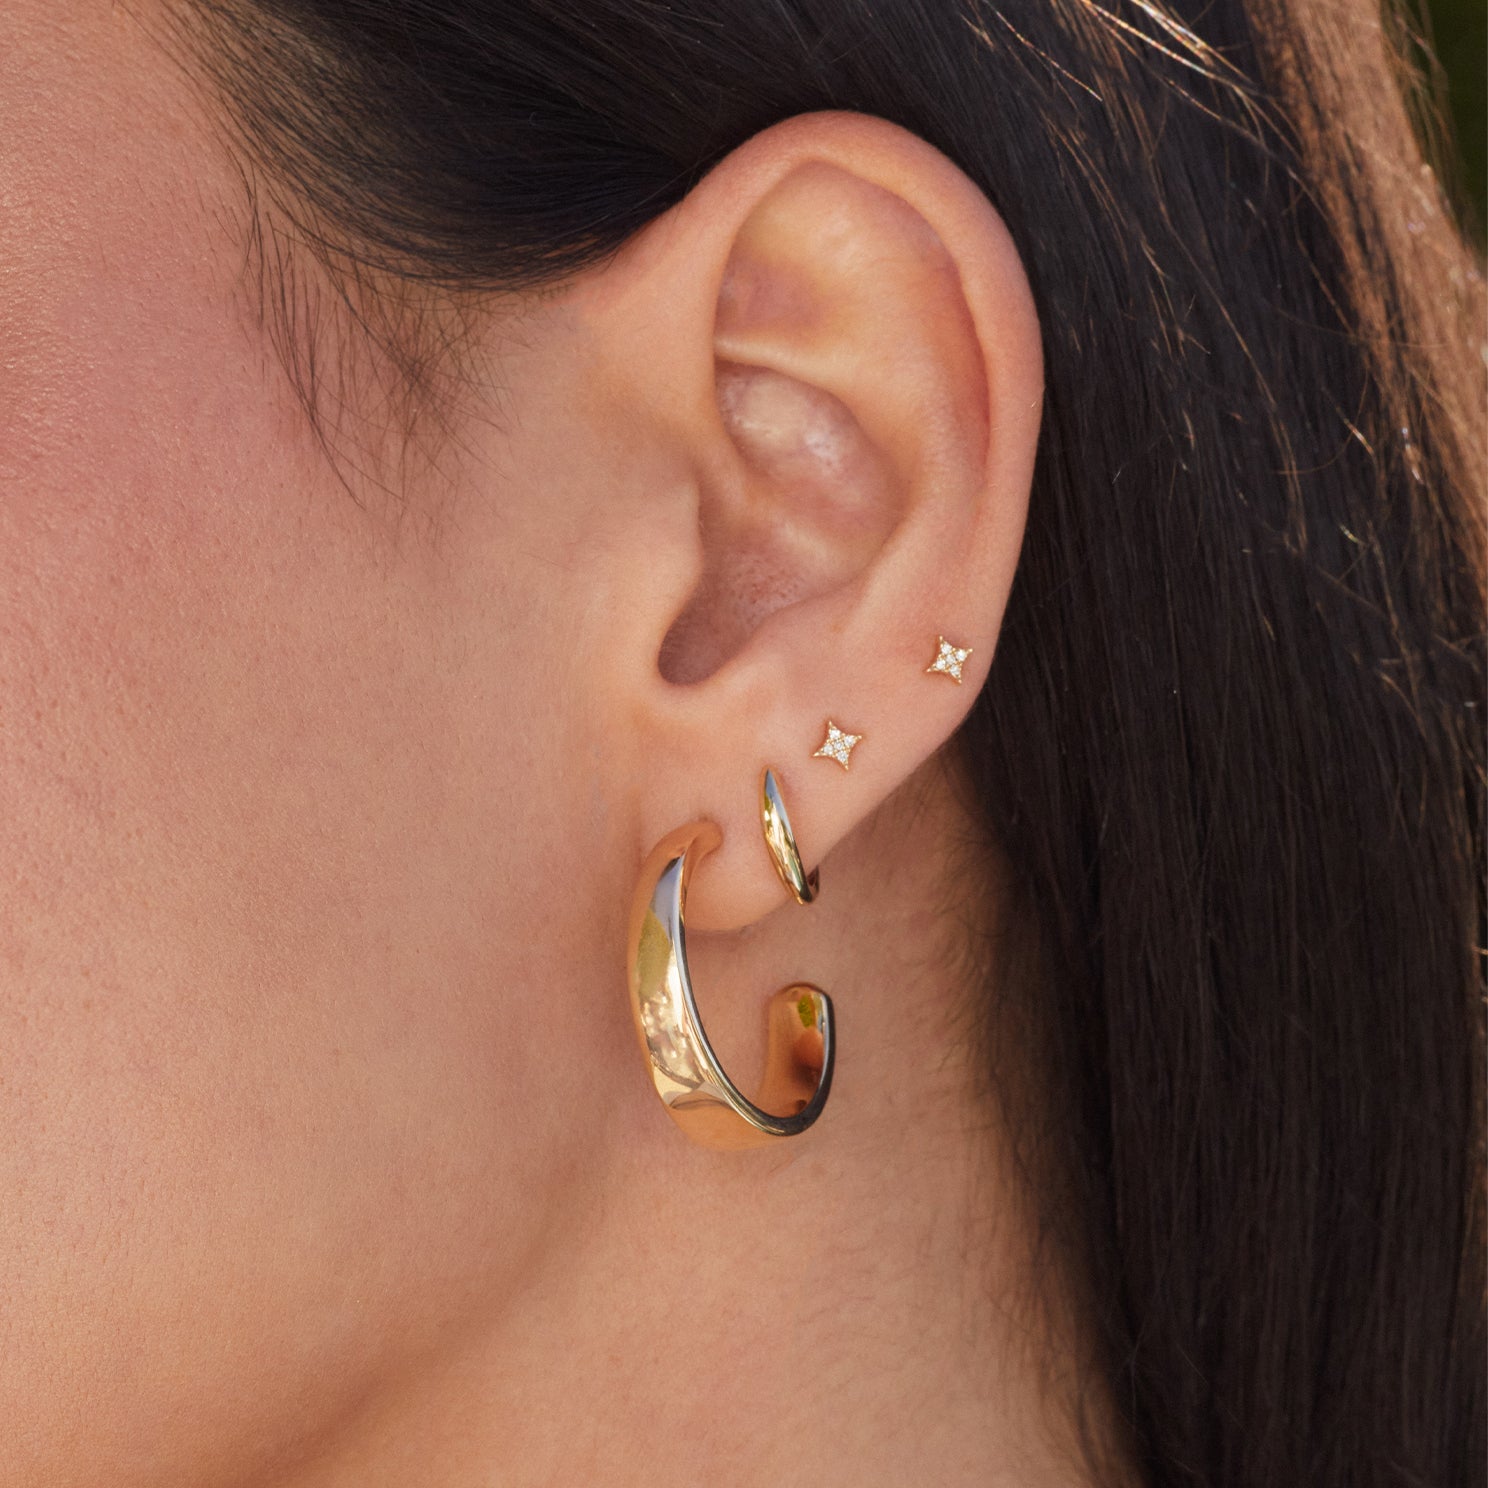 Diamond Sparkle Stud Earring in 14k yellow gold styled on third and fourth earring hole of model next to gold dome earring and gold tapered hoop earring